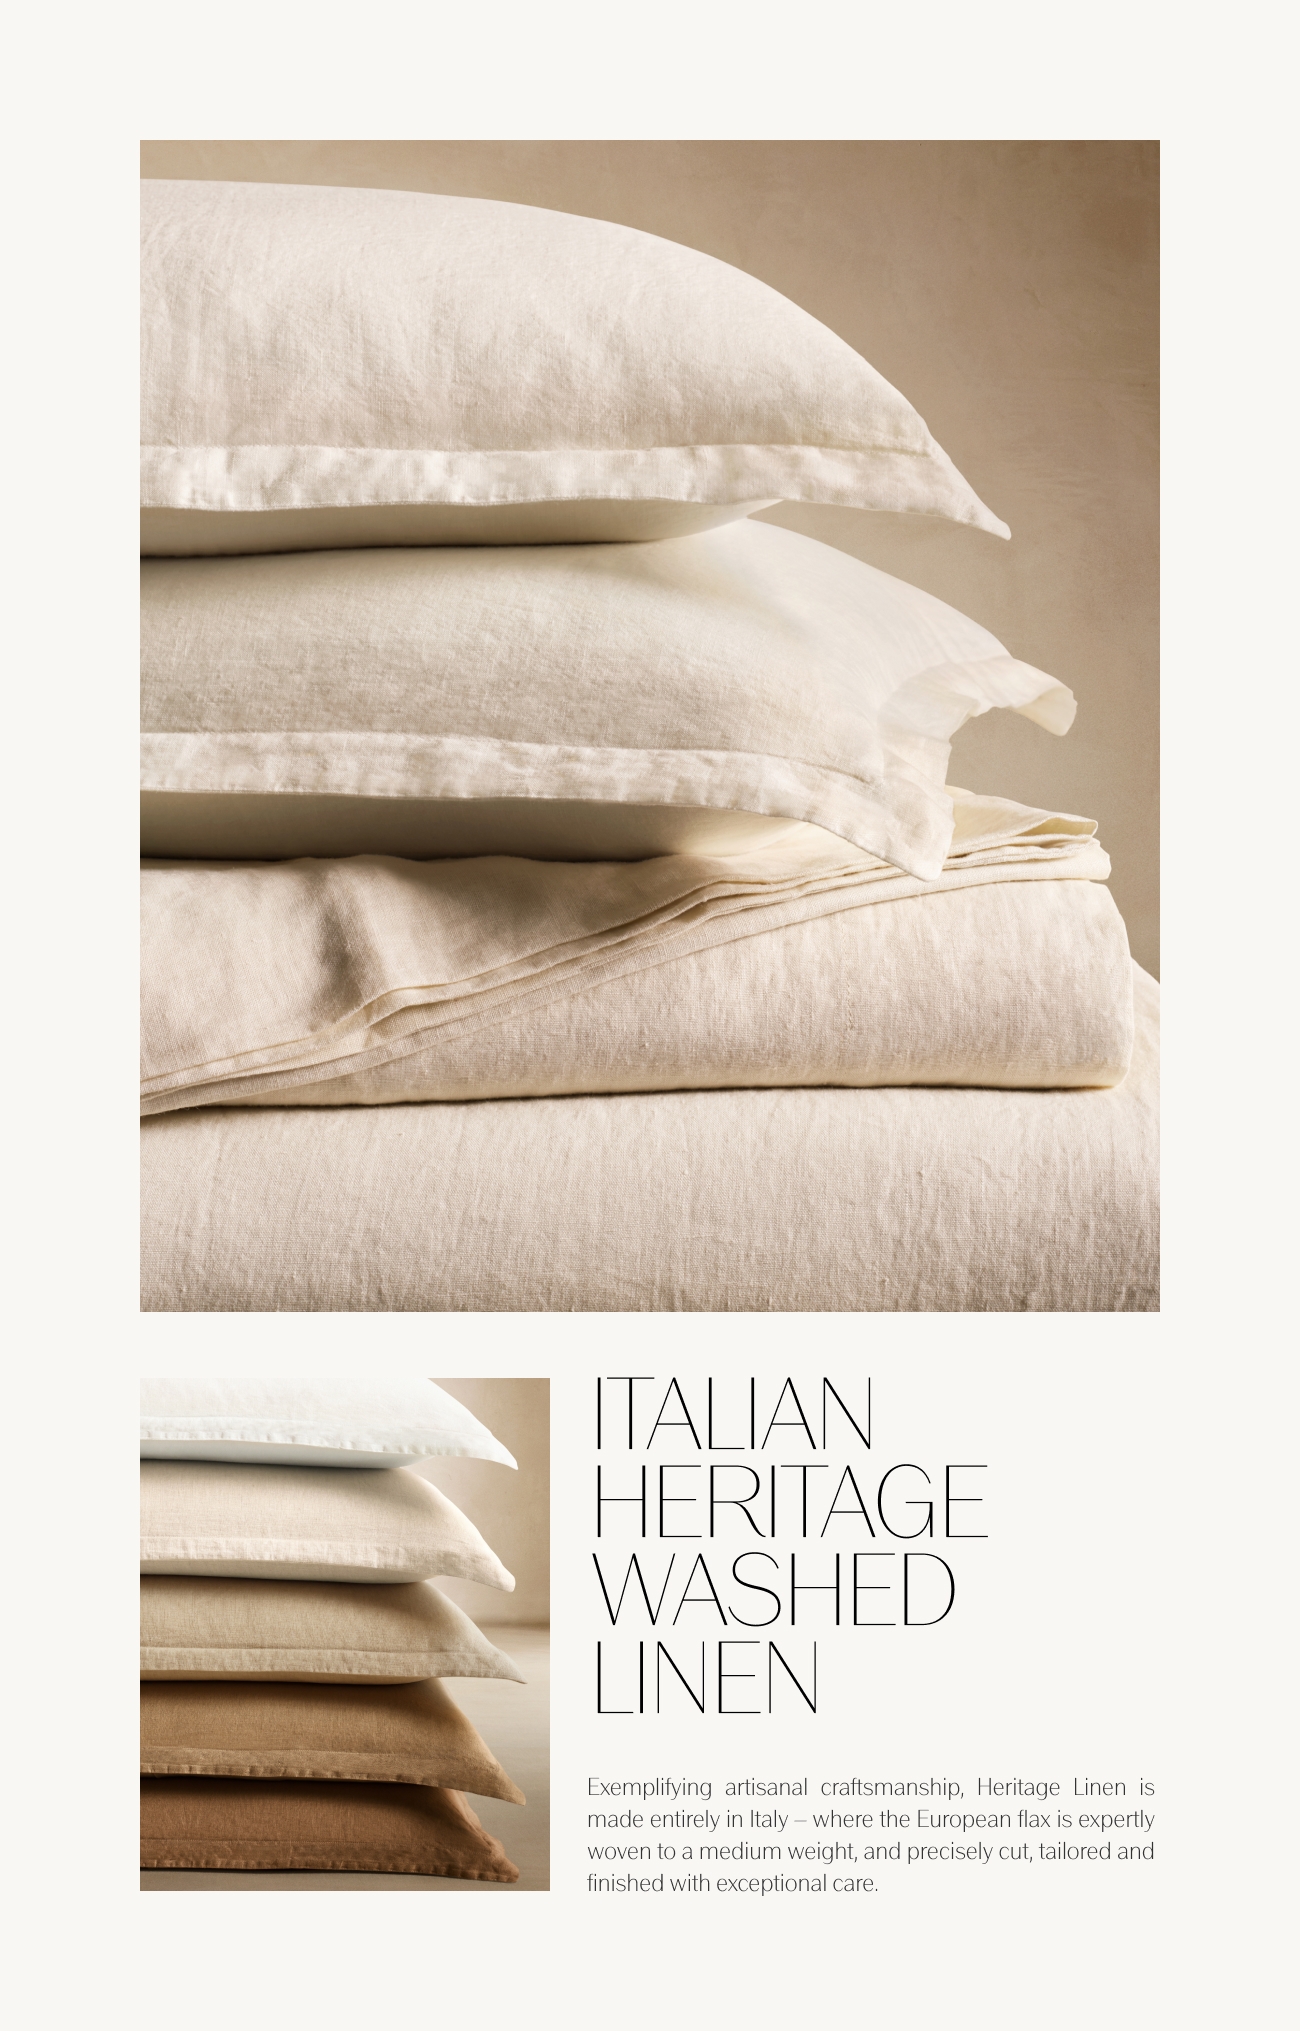  TALIAN HERITAGE WASHED LINEN Exemplifying artisanal craftsmanship, Heritage Linen is made entirely in Italy where the European flax is expertly woven to a medium weight, and precisely cut, tailored and finished with exceptional care 